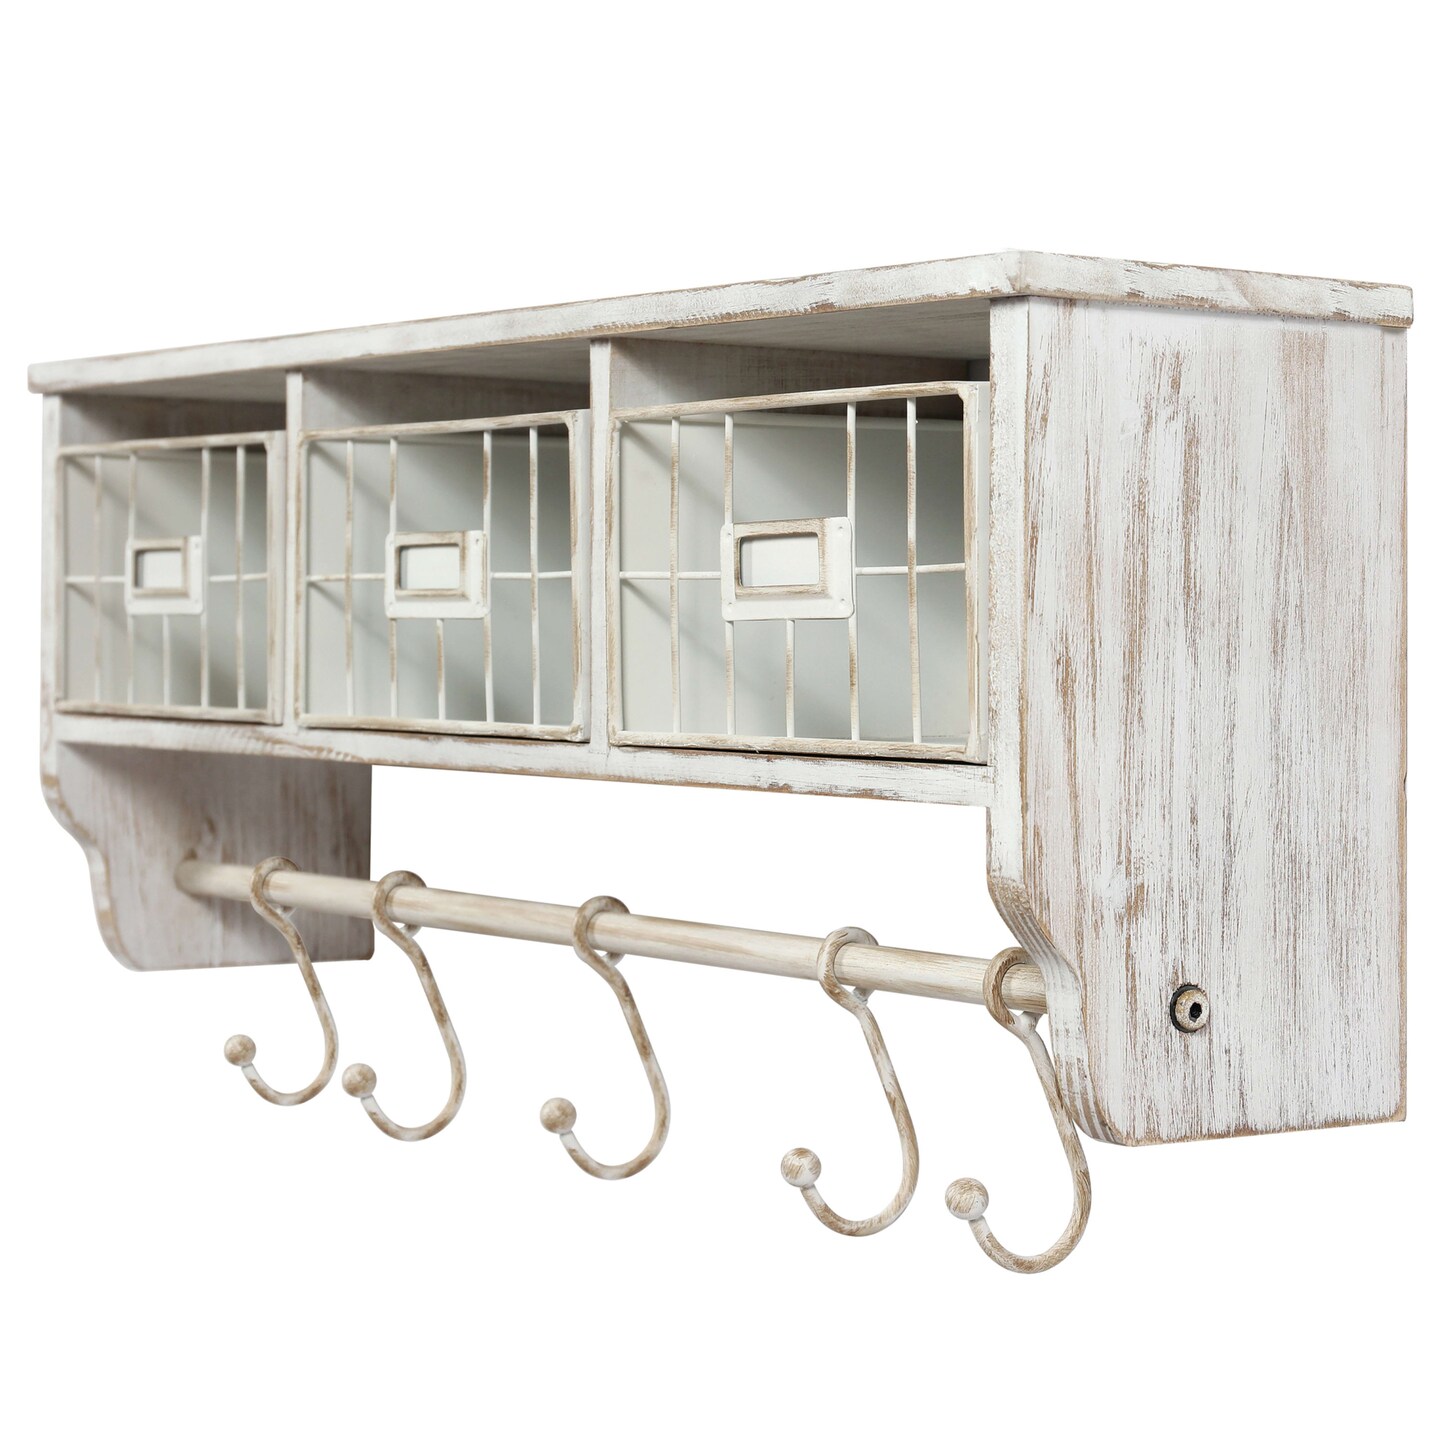 HBCY Creations Rustic Coat Rack Wall Mounted Shelf with Hooks